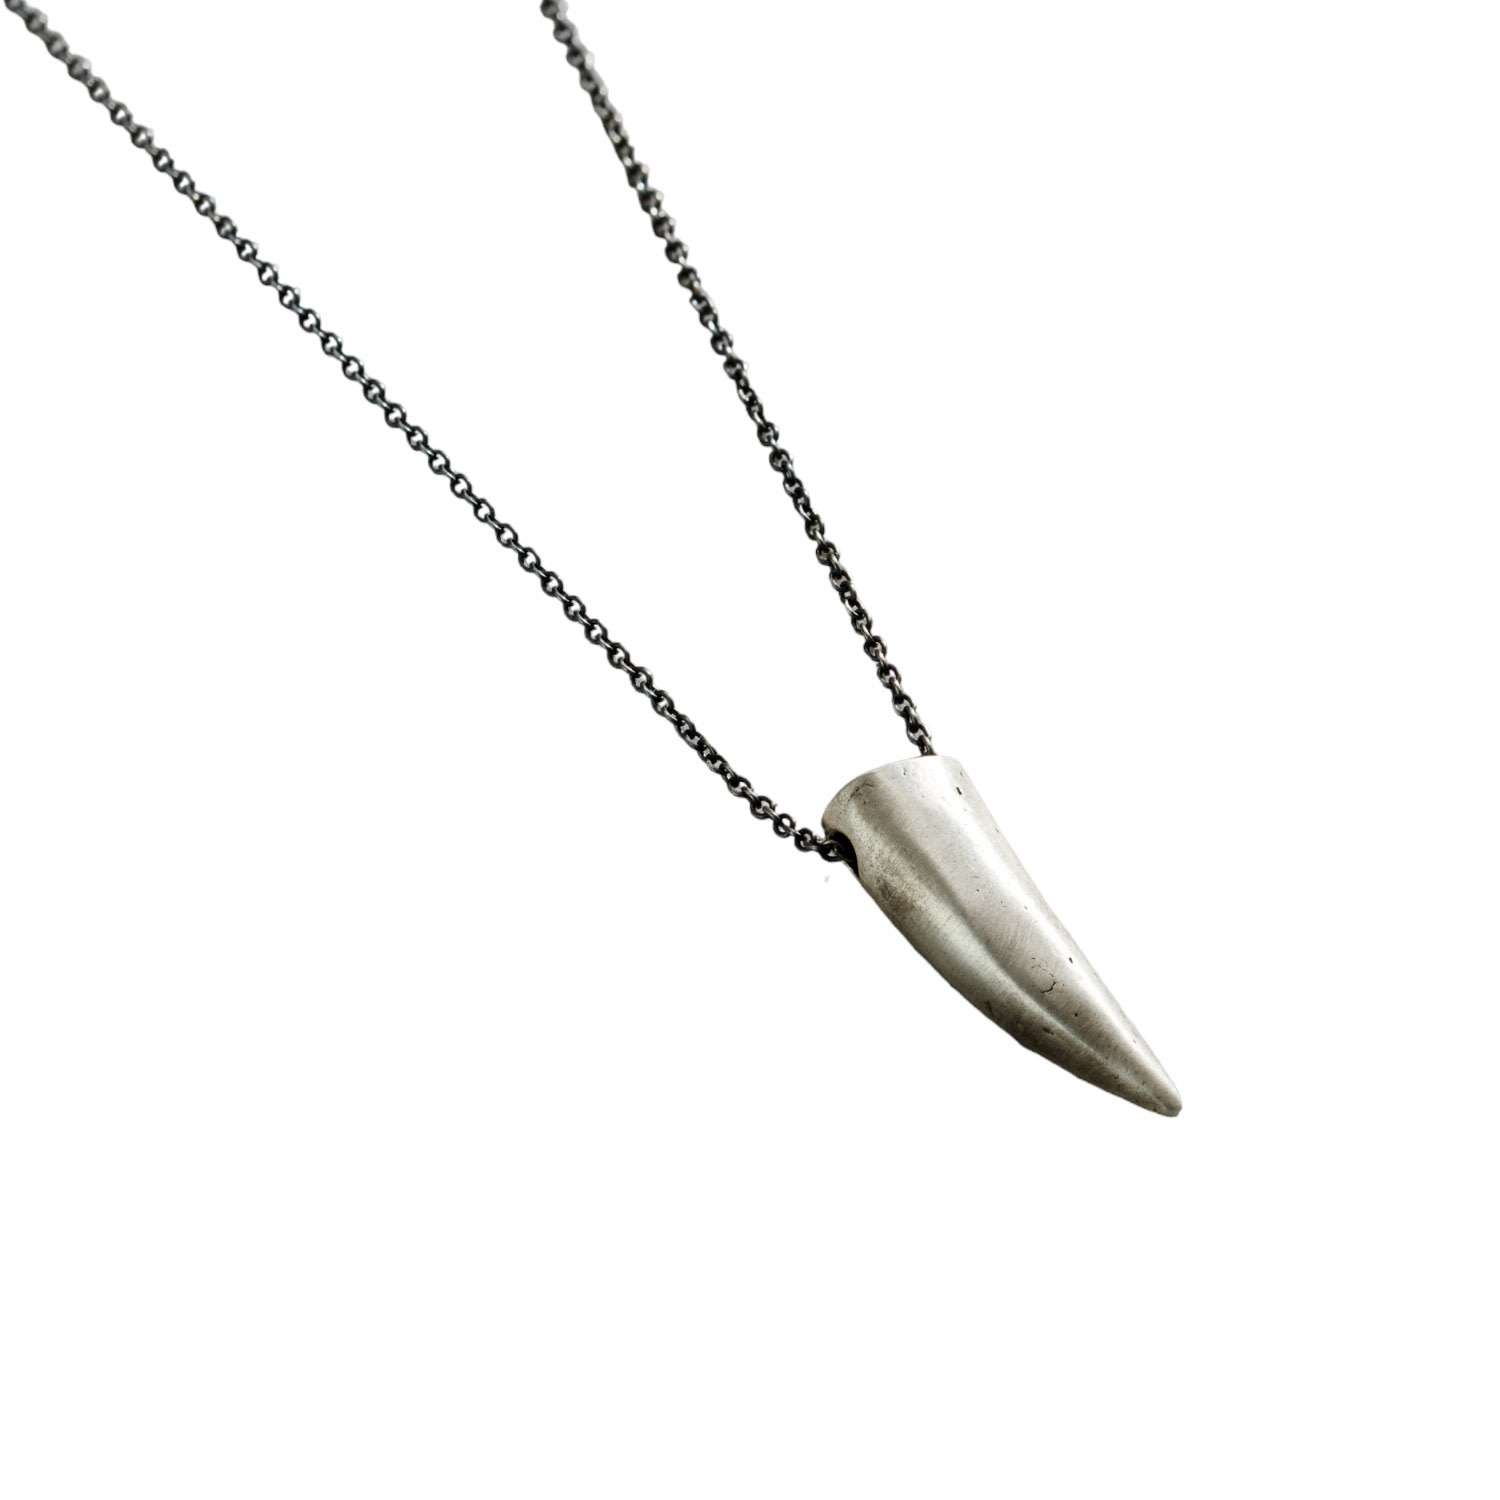 Posh Totty Designs Men's Men's Oxidised Silver Sharks Tooth Necklace